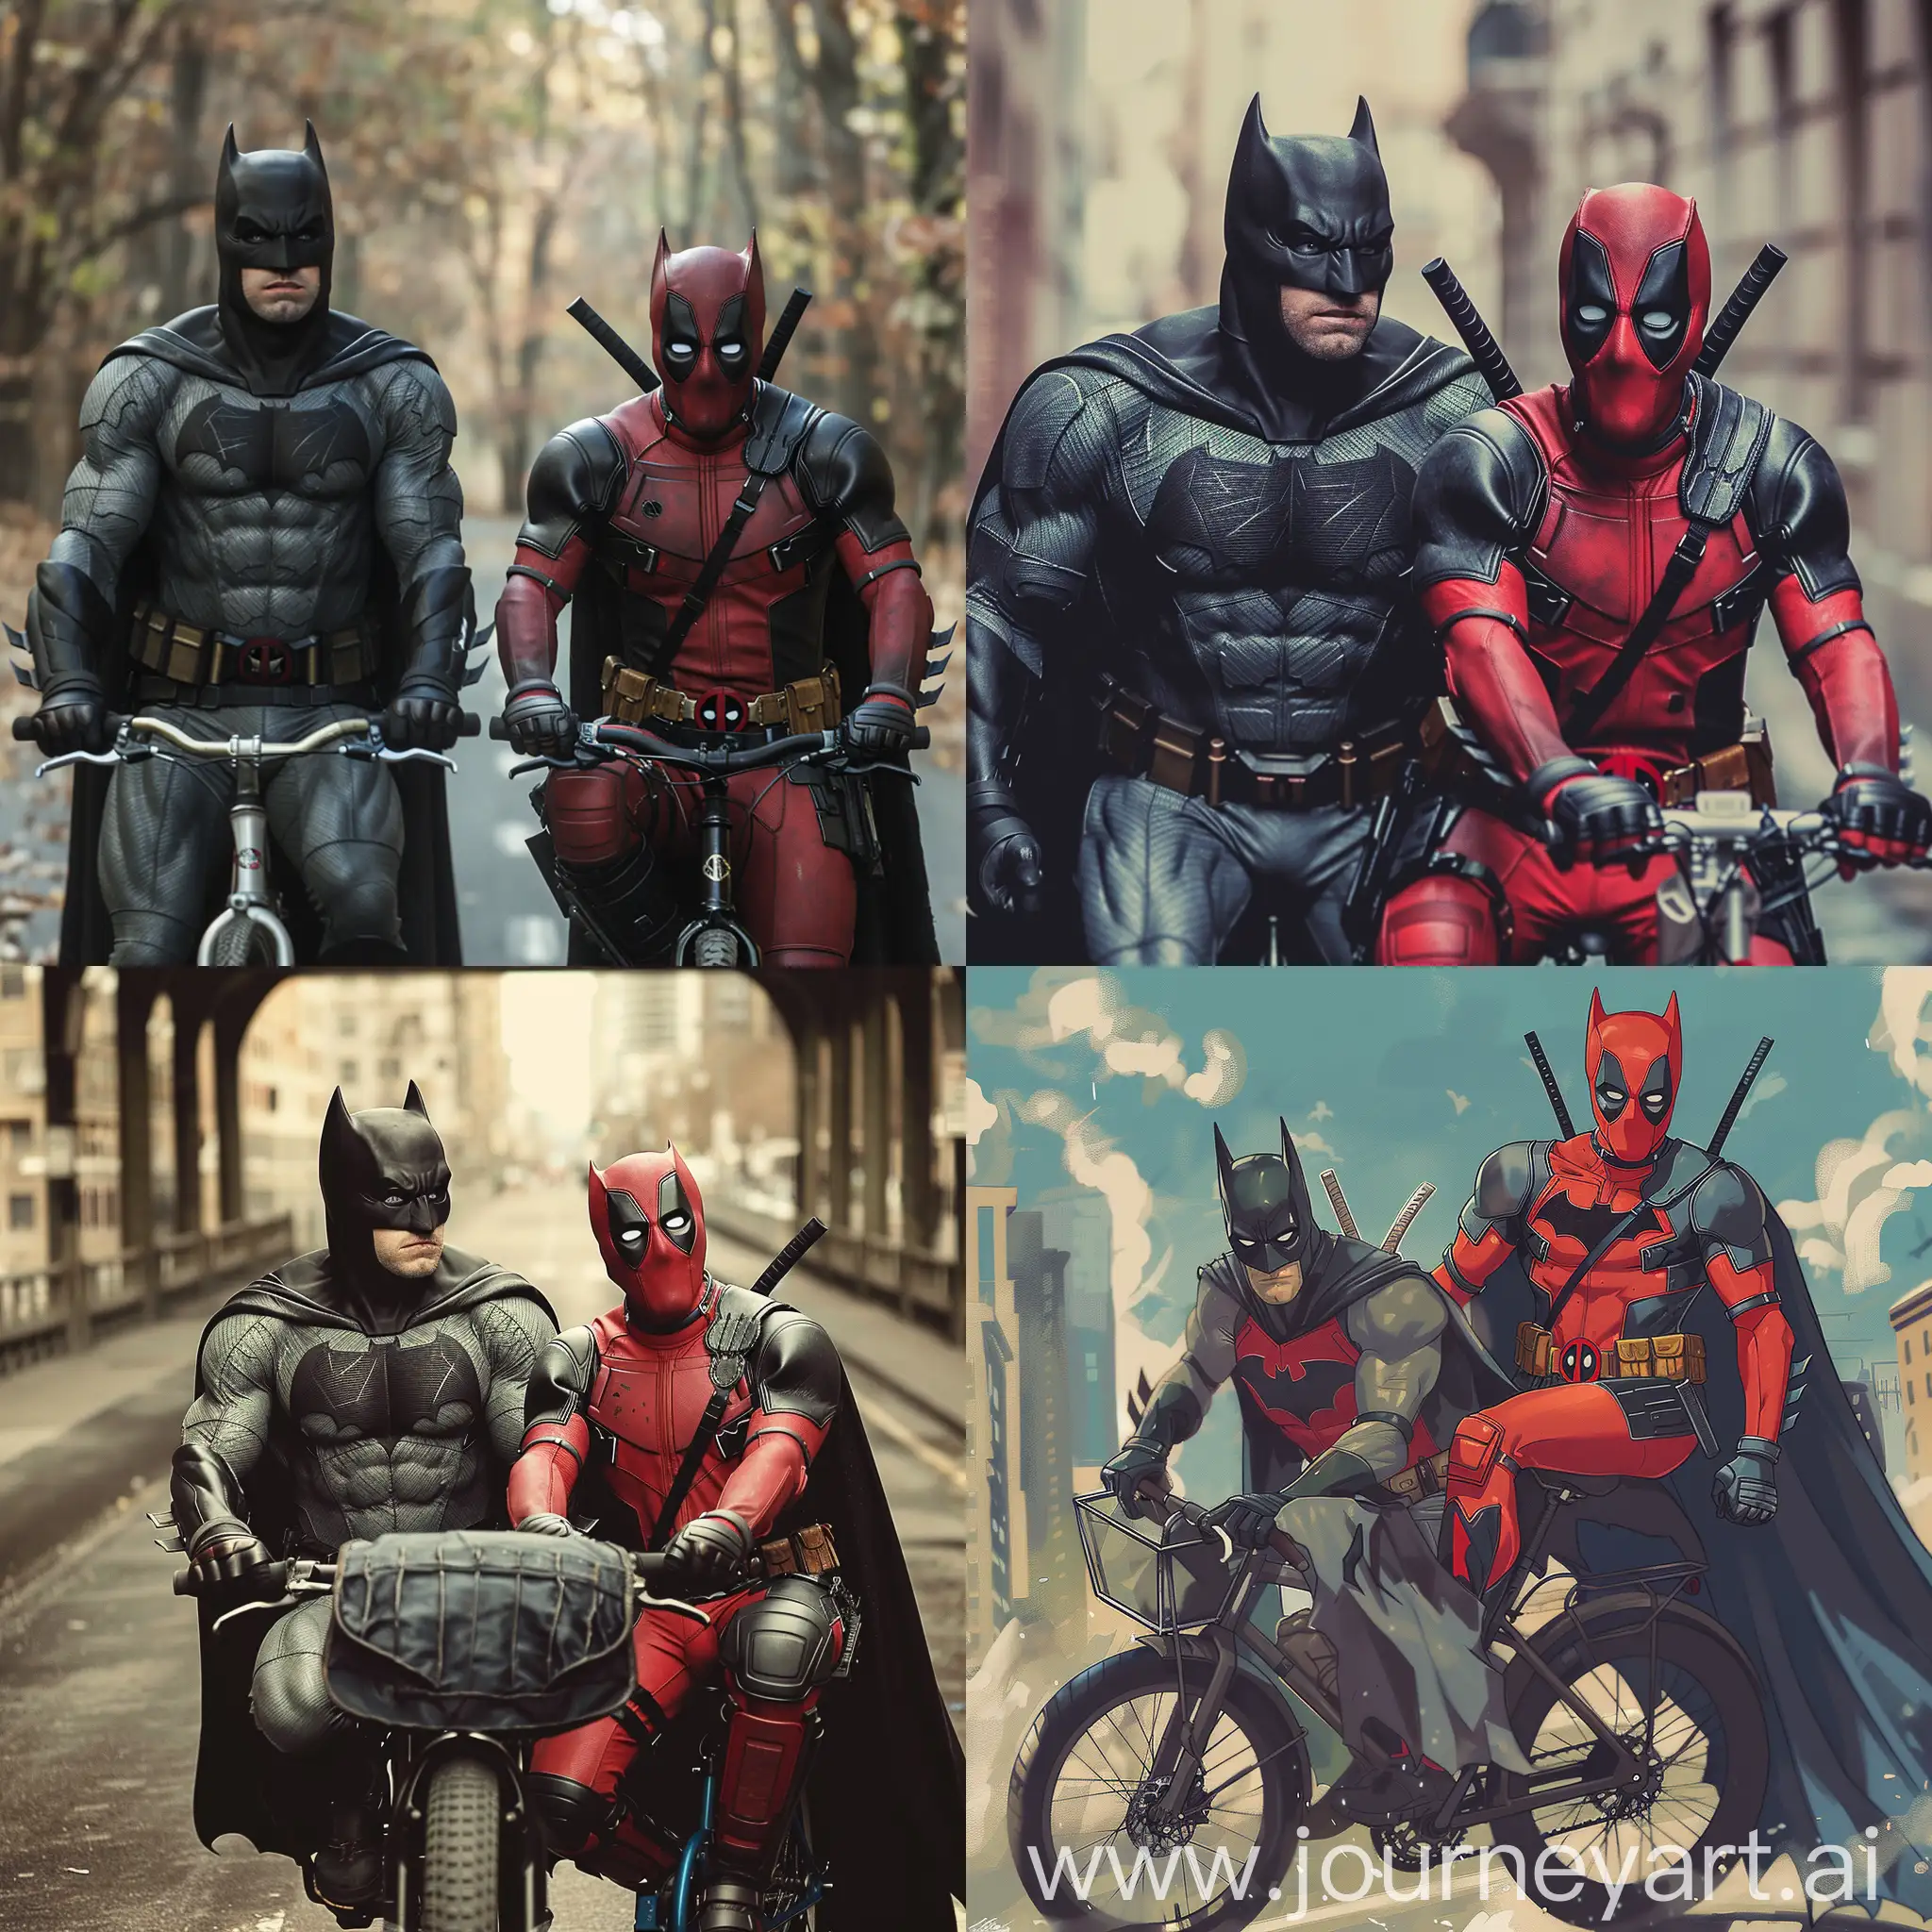 Batman-and-Deadpool-Riding-Motorcycle-Together